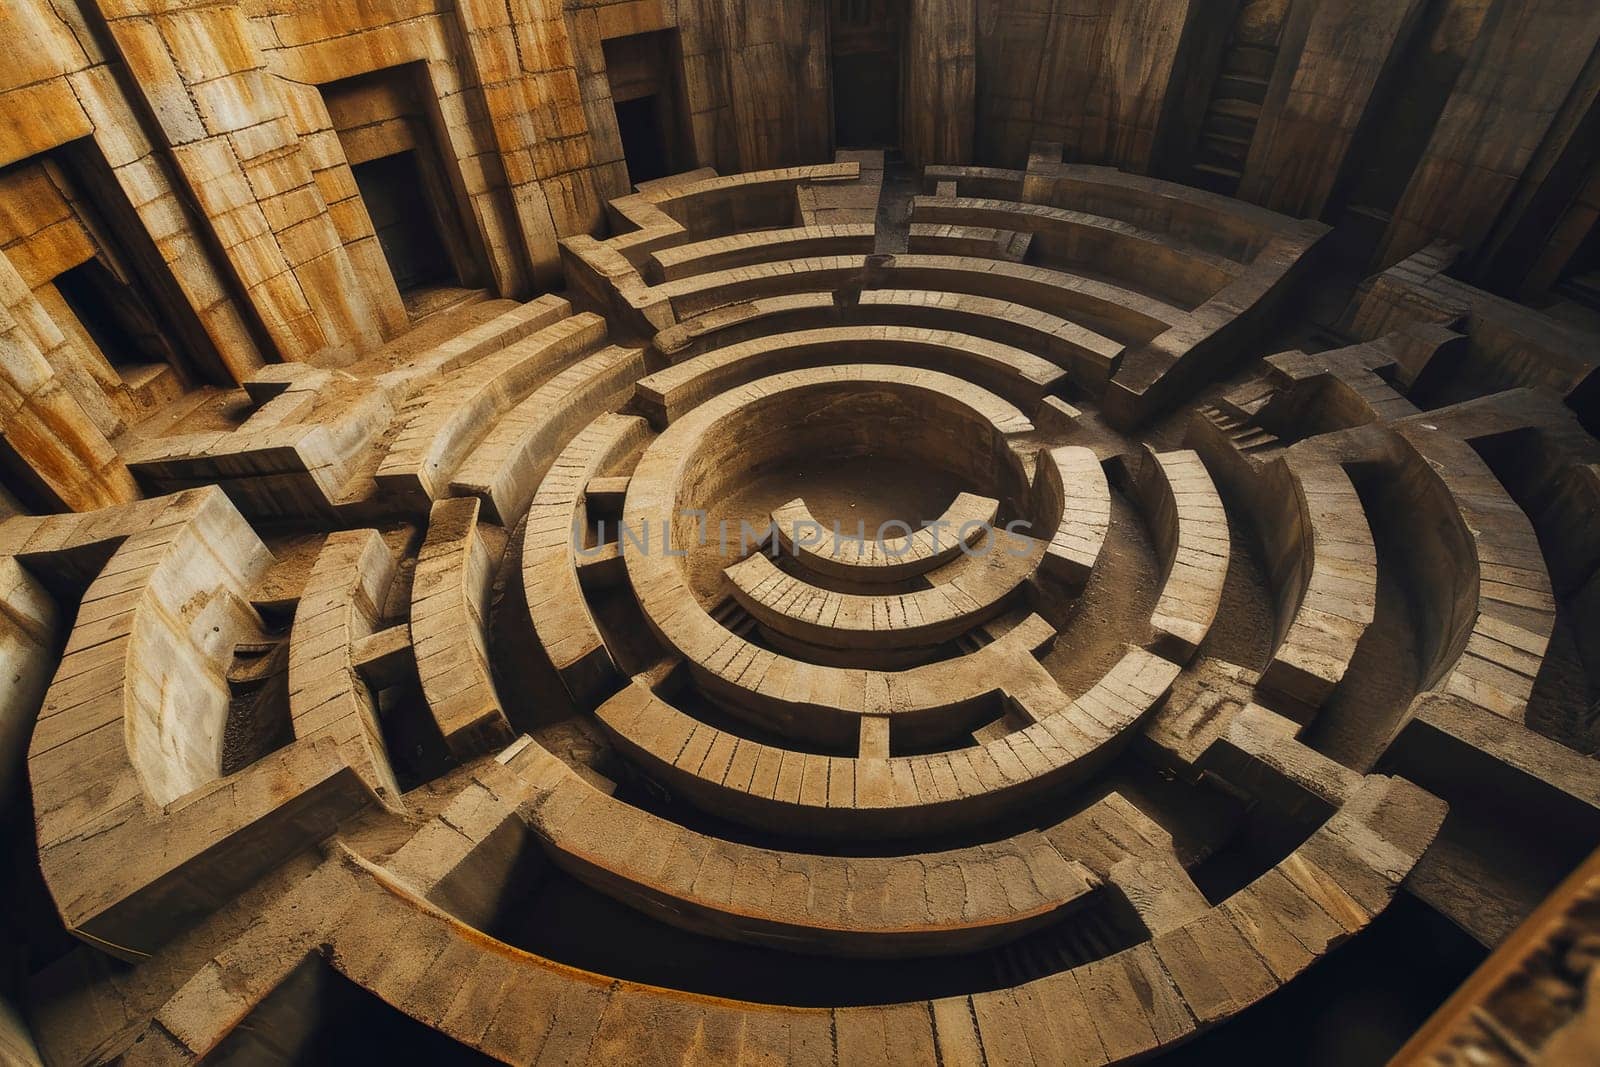 Top view of a large intricate stone labyrinth